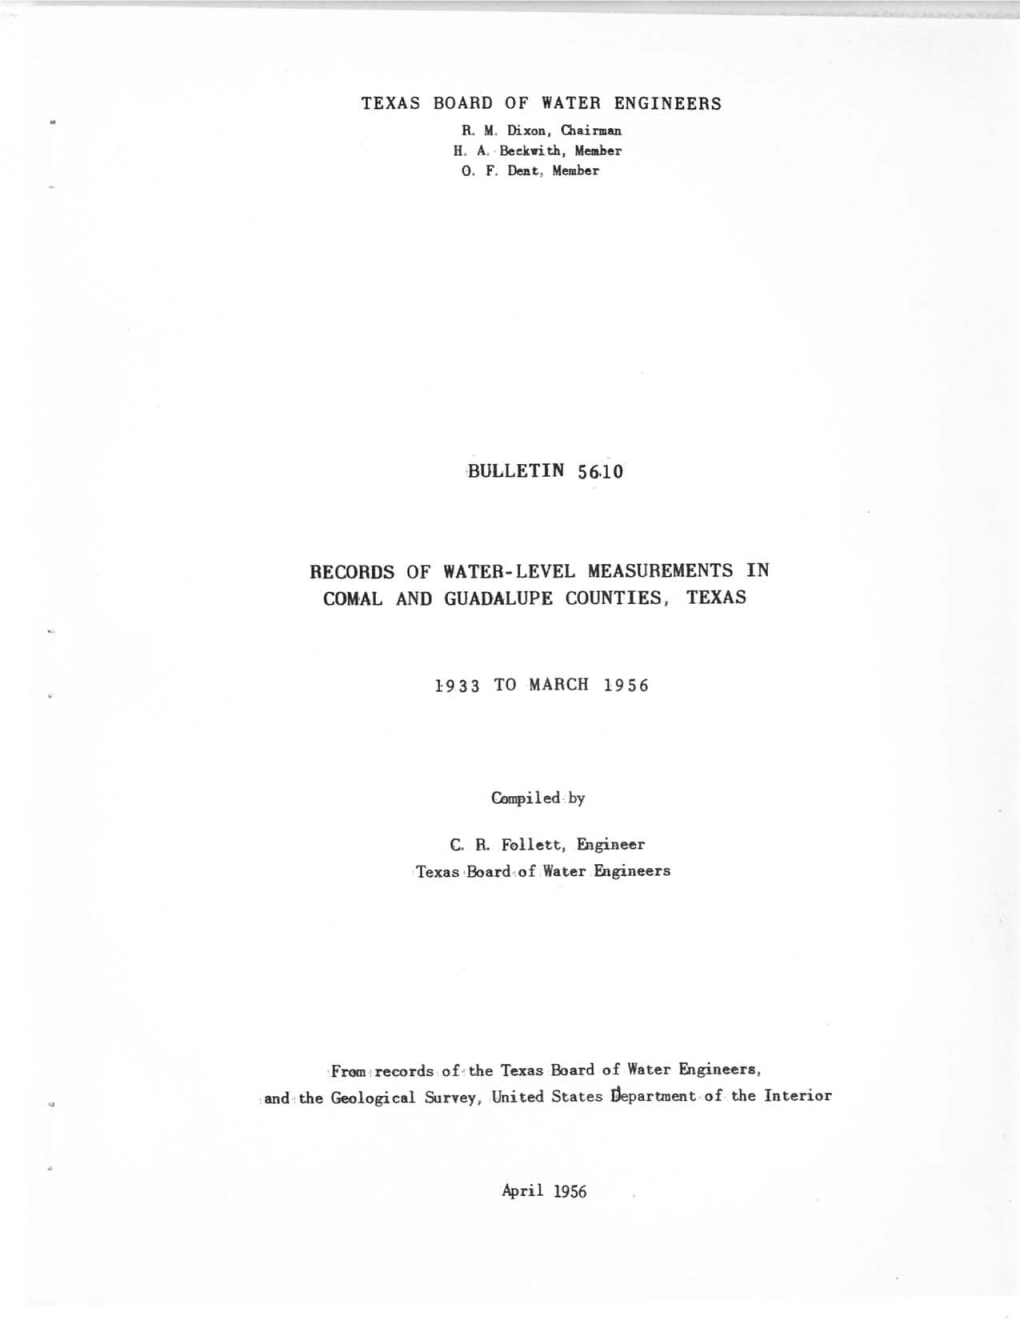 Records of Water-Level Measurements in Comal and Guadalupe Counties, Texas 1933 to March 1956